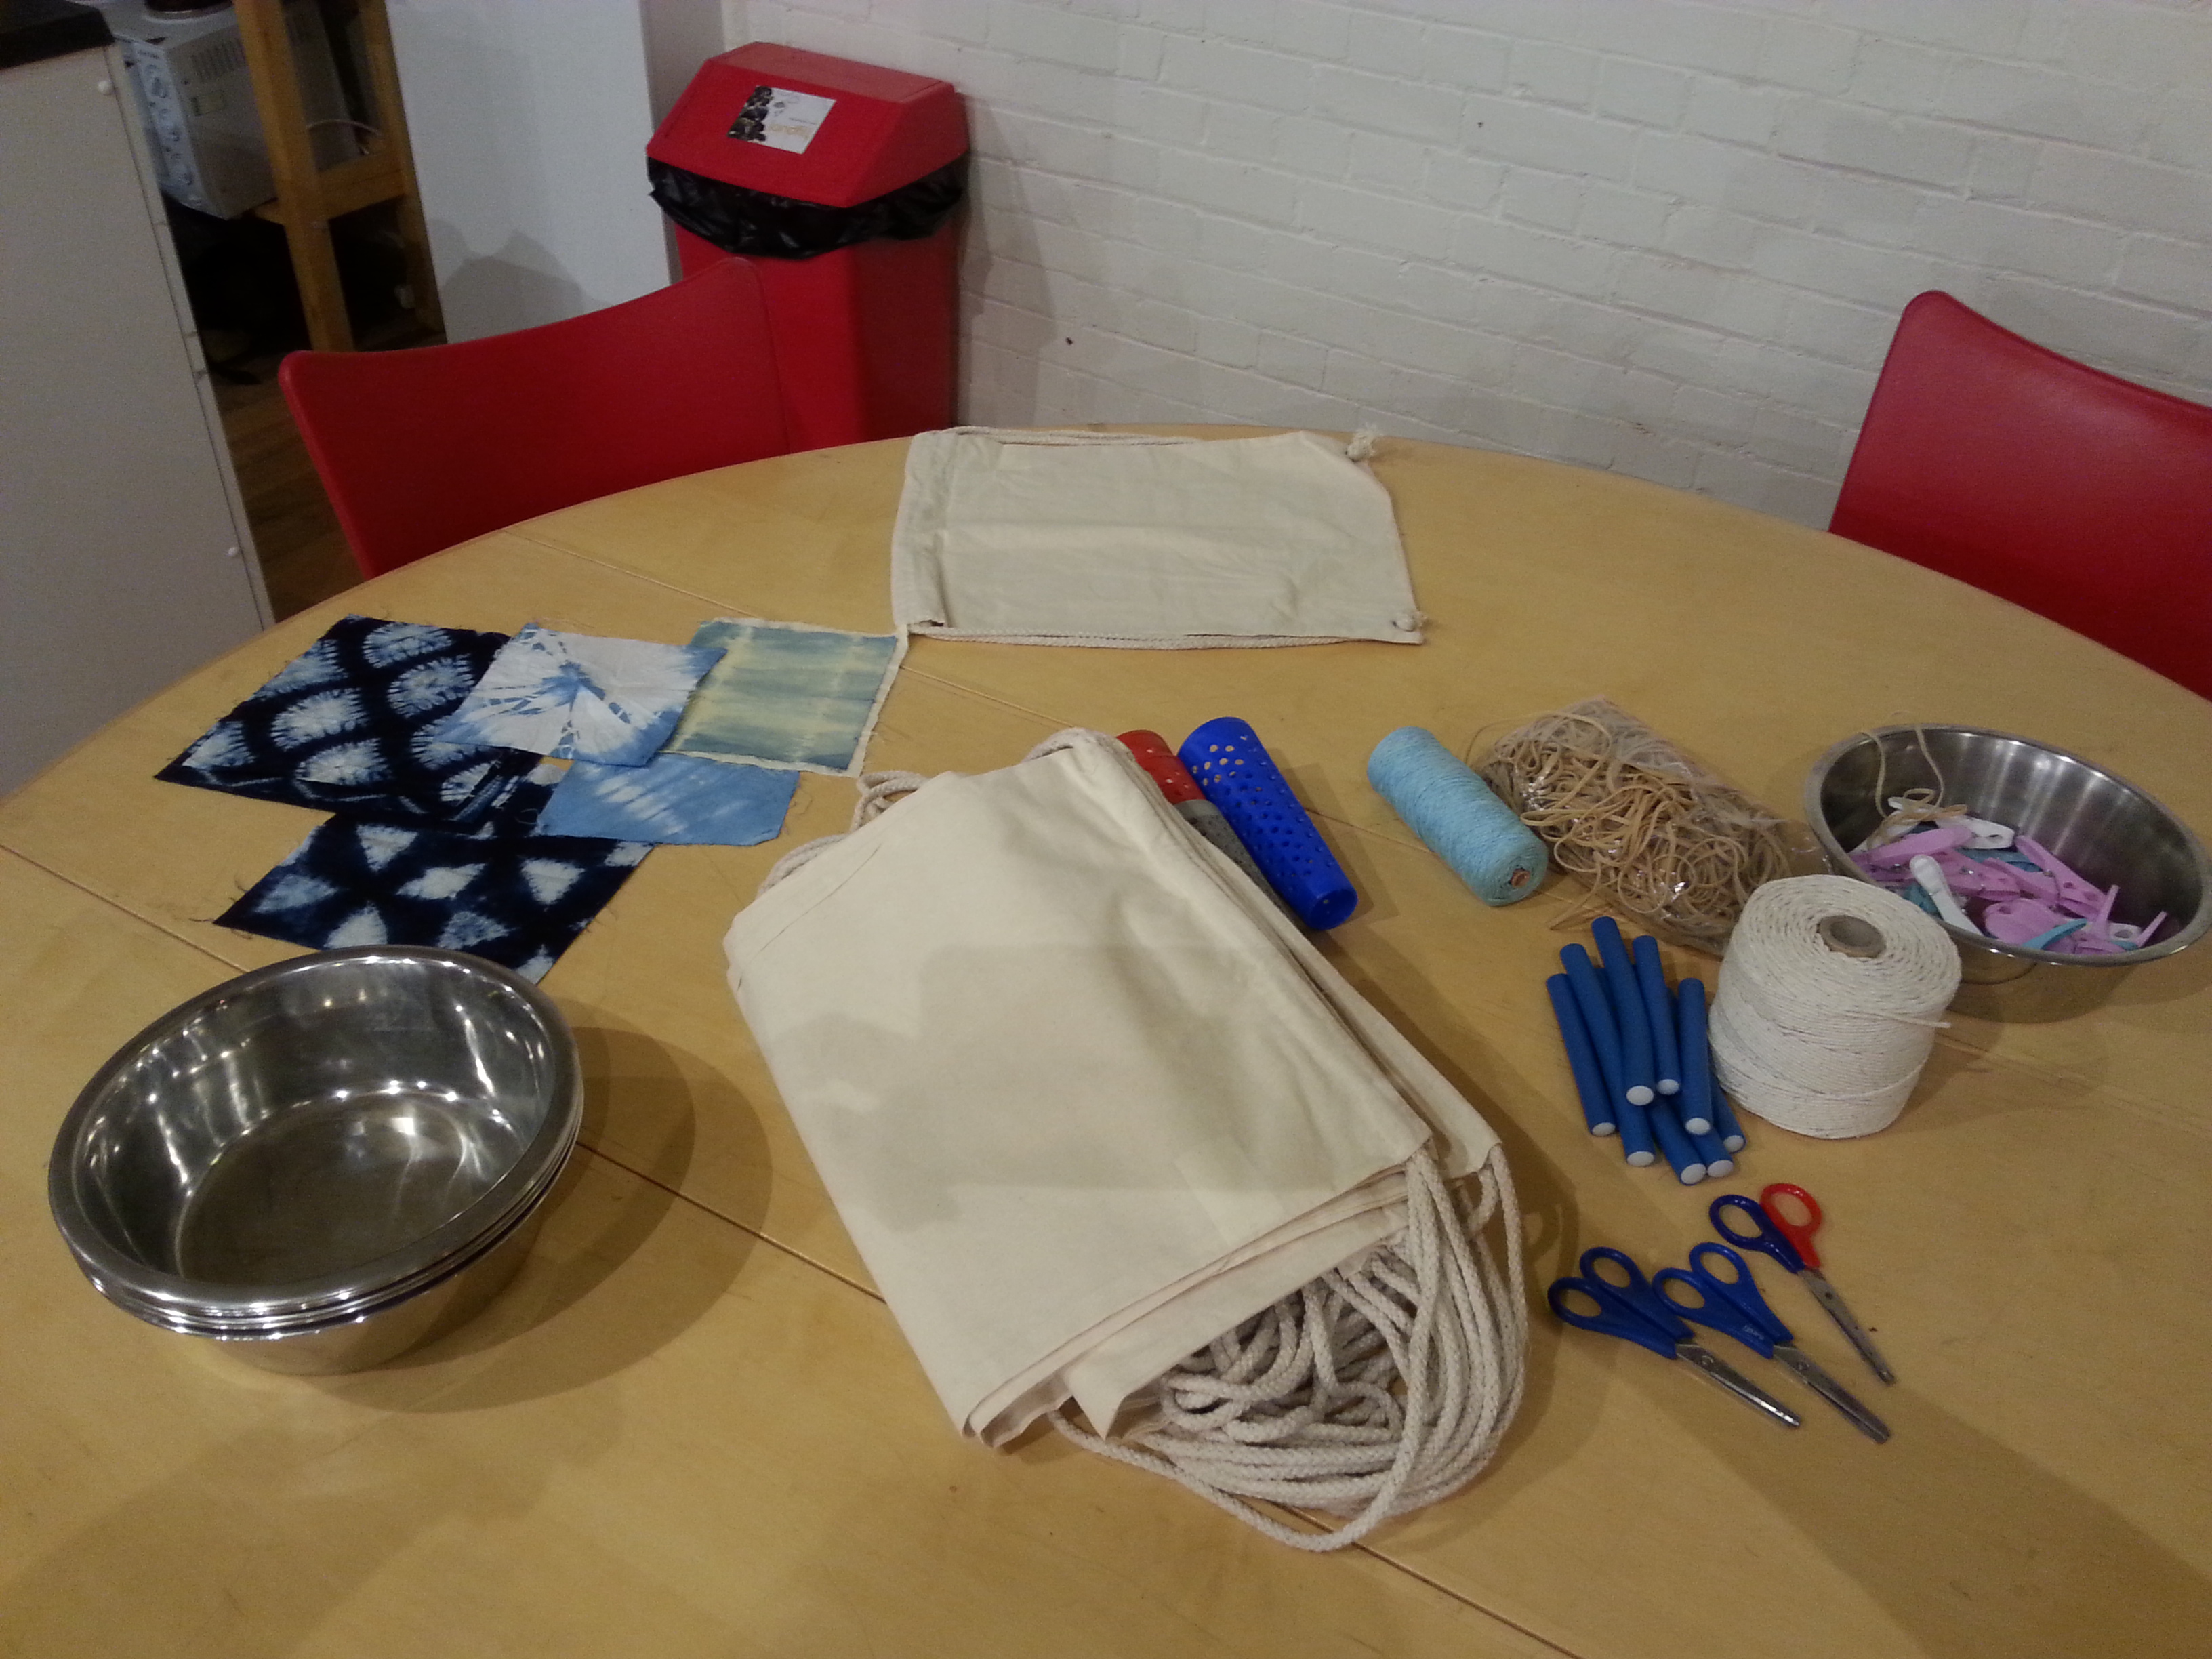 Indigo dyeing workshop with after-school clubs with Debbie Tomkies of Making Futures